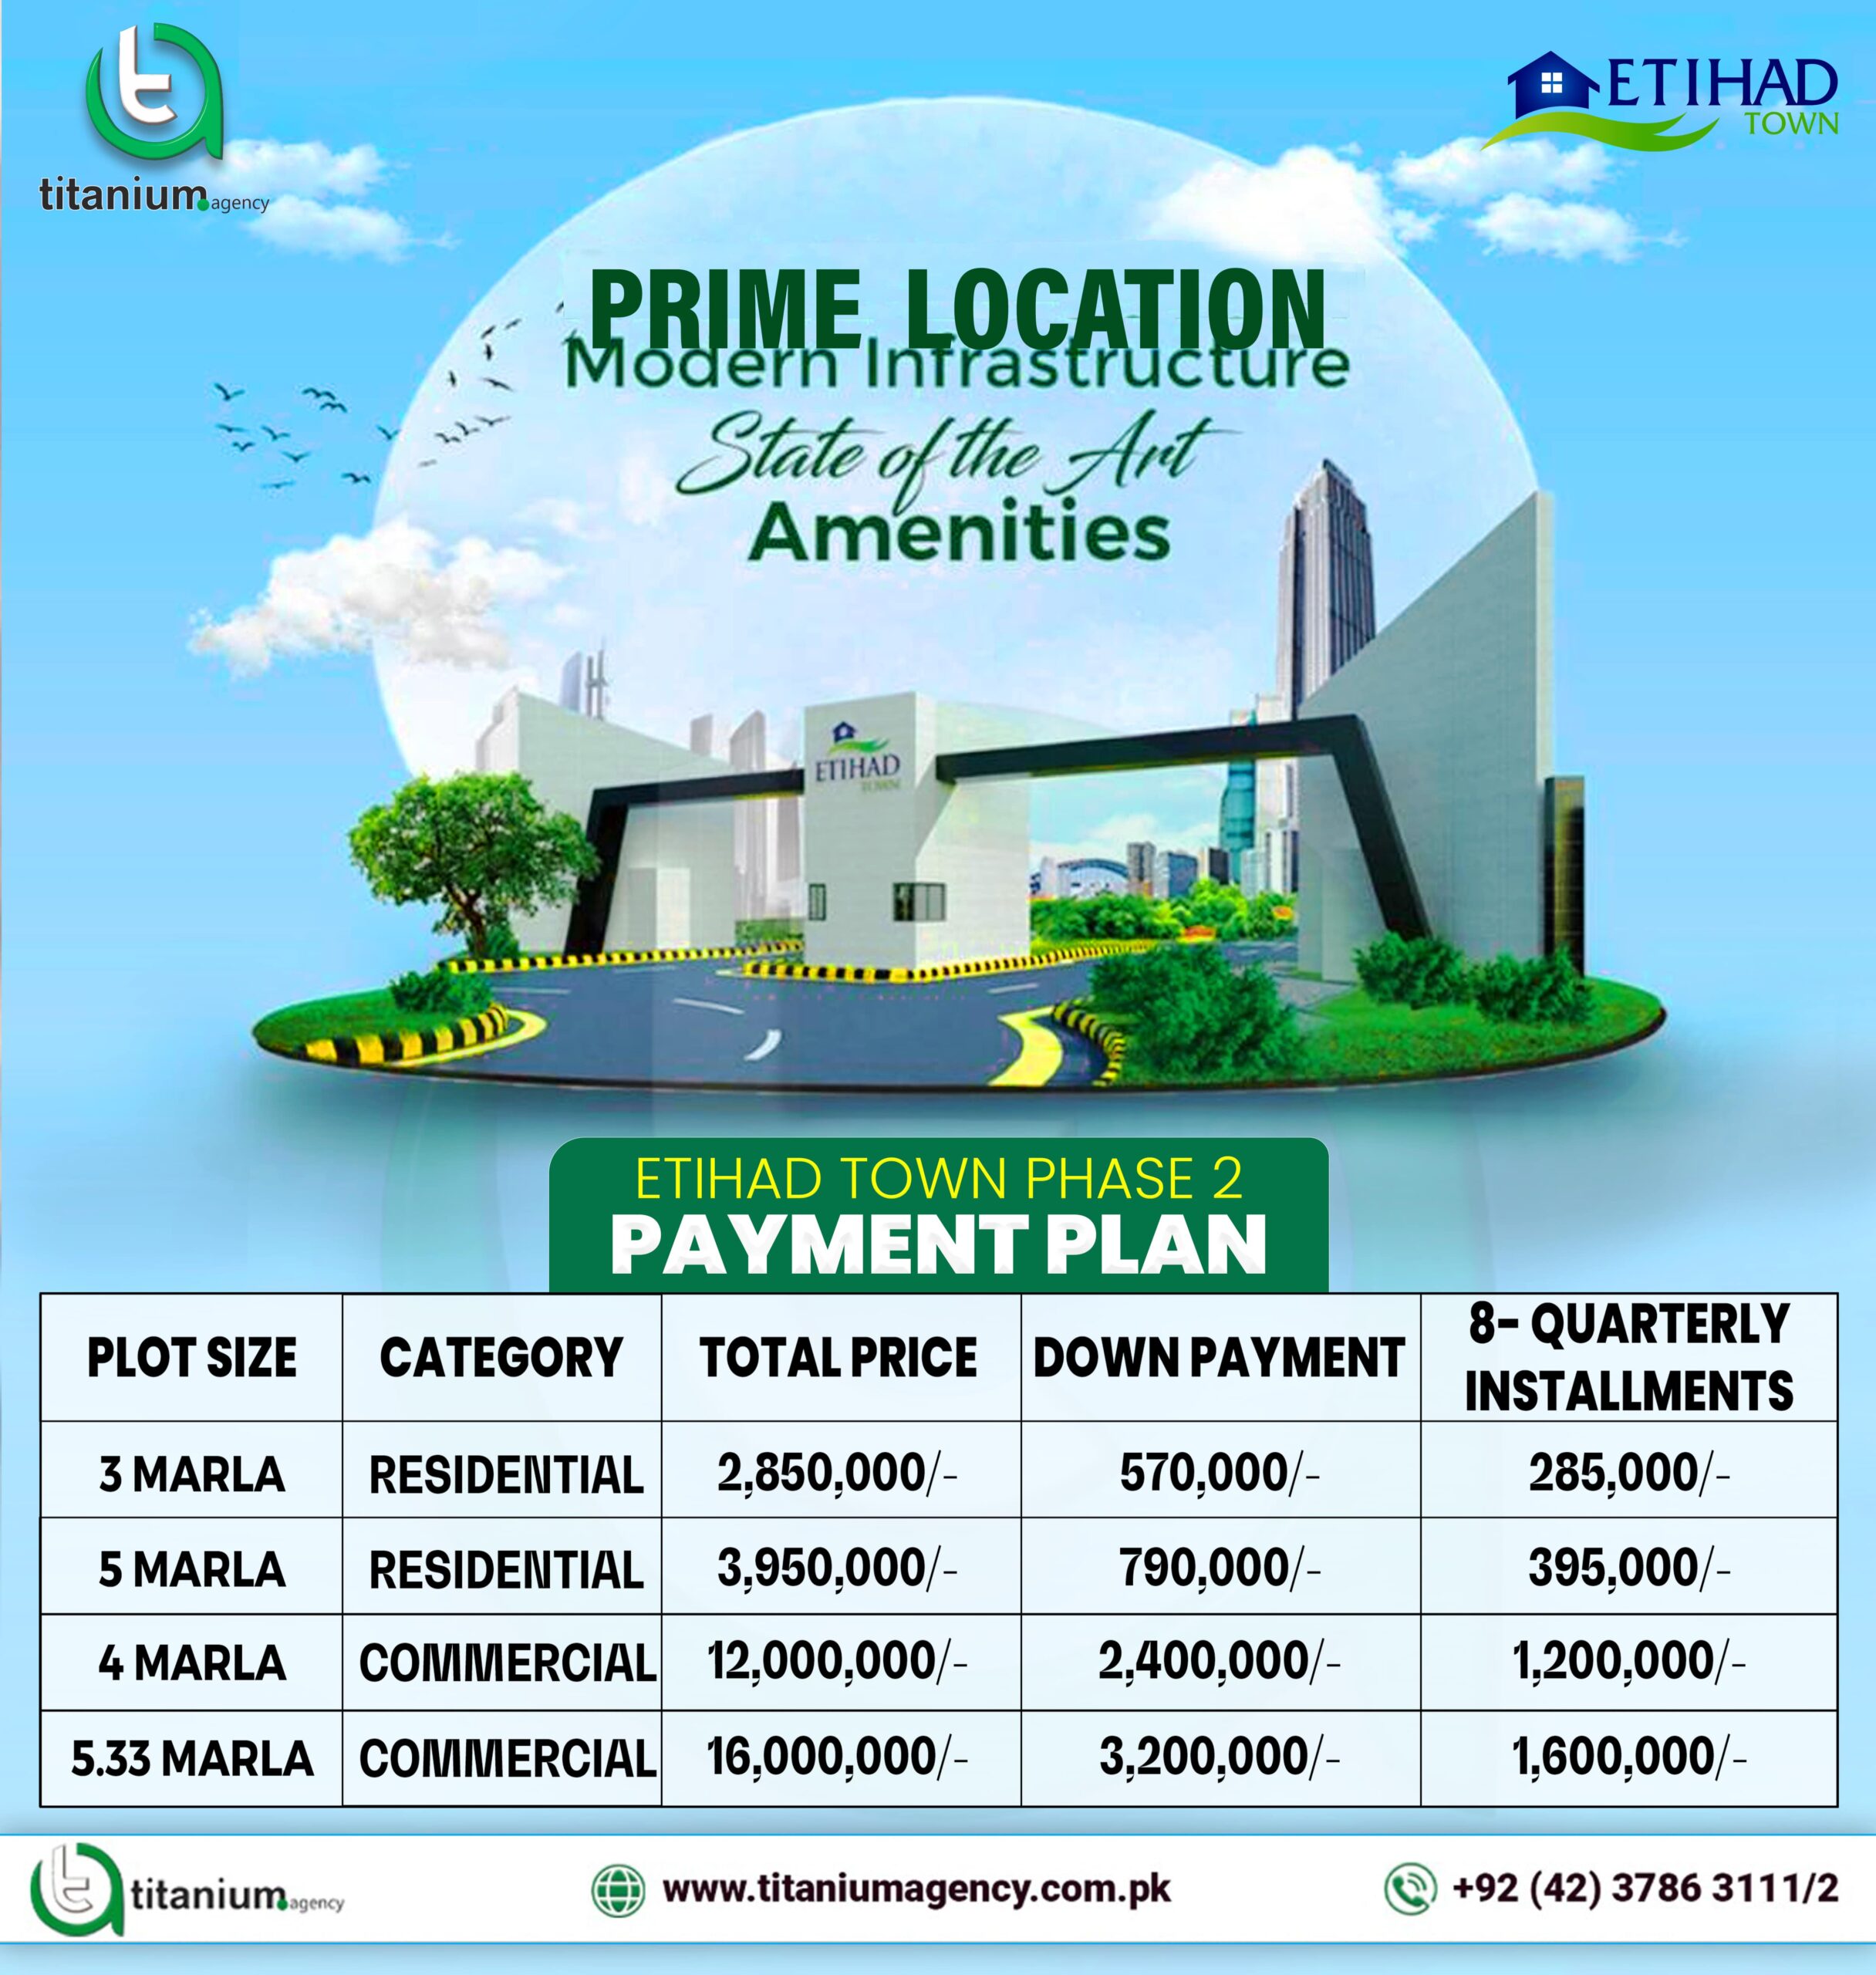 Payment Plan - Etihad Town Phase 2